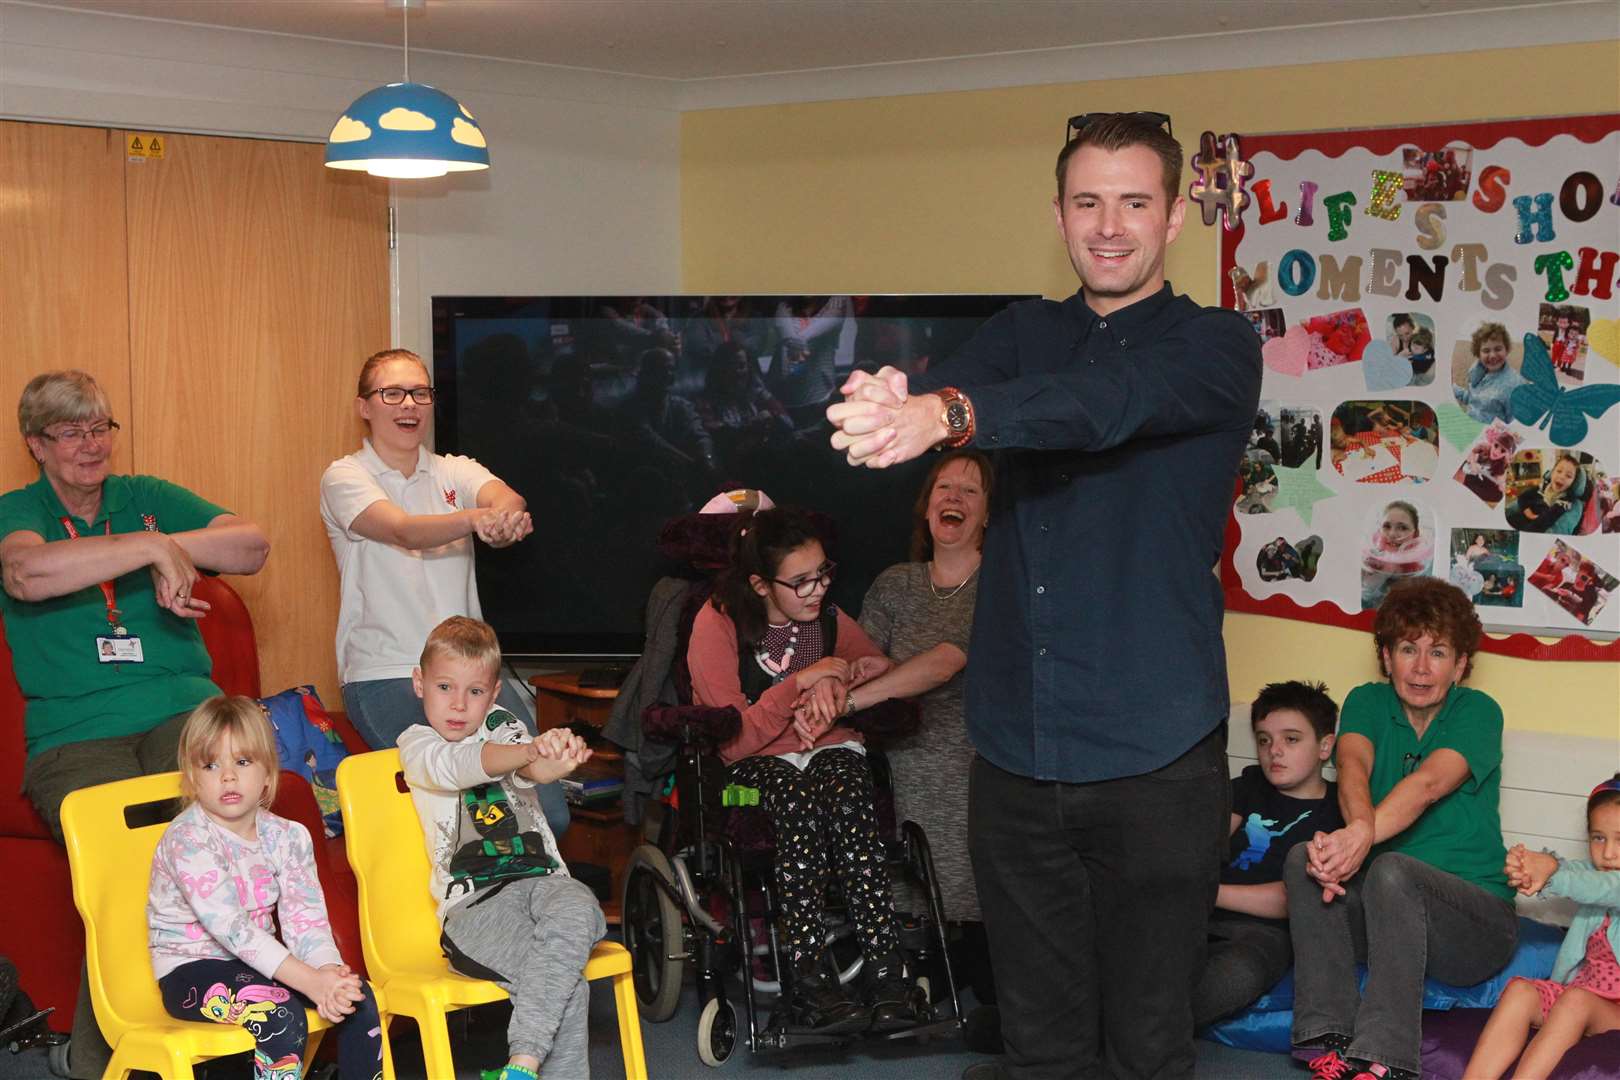 Richard Jones winner of Britain's Got Talent, a couple of years ago, warms up the audience for a magic show for children and family at Demelza Hospice Care for Children. Picture by: John Westhrop (5050866)